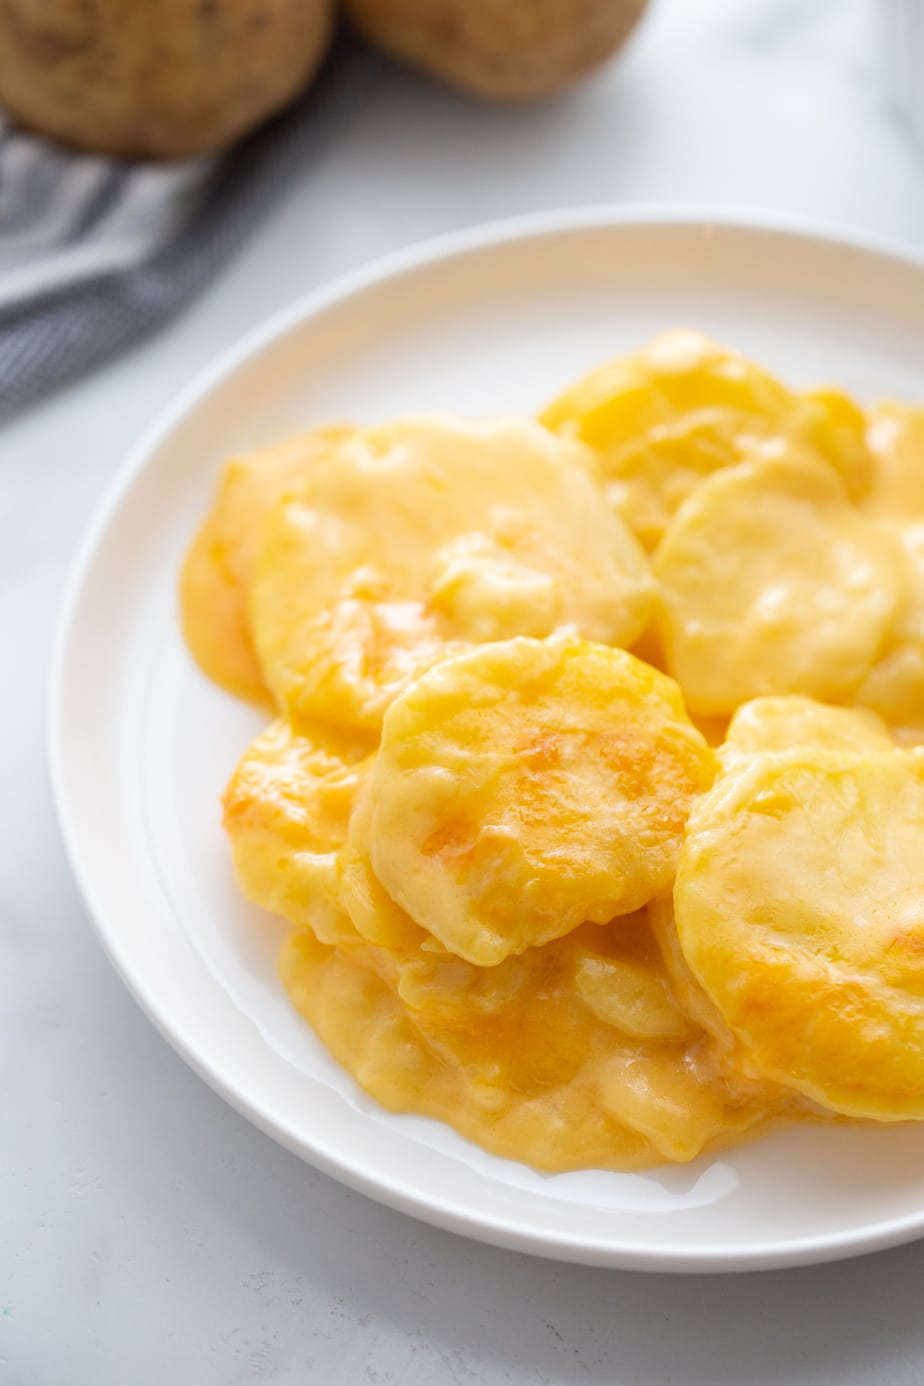 Golden cheesy scalloped potatoes are served on a white plate.